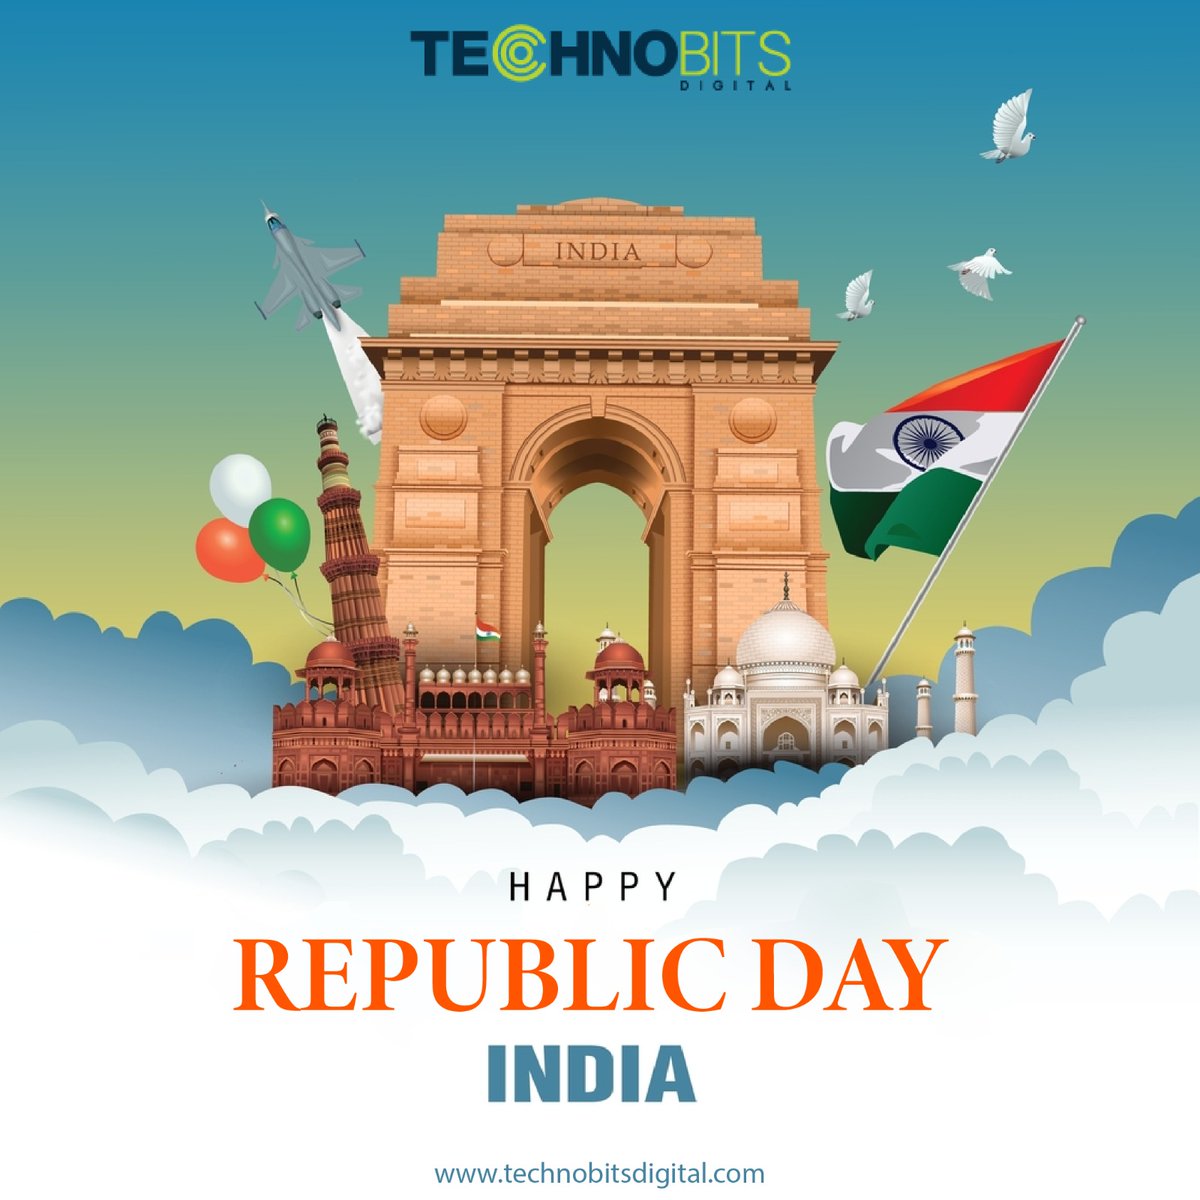 Happy Republic Day, India! 🇮🇳 Let's celebrate the essence of unity, diversity, and democracy that defines our nation's spirit. May this day inspire us to strive for a brighter, more inclusive future for all. Jai Hind! 🎉
.
.
#happyrepublicday #evoltechnobitsdigital #evolgroup